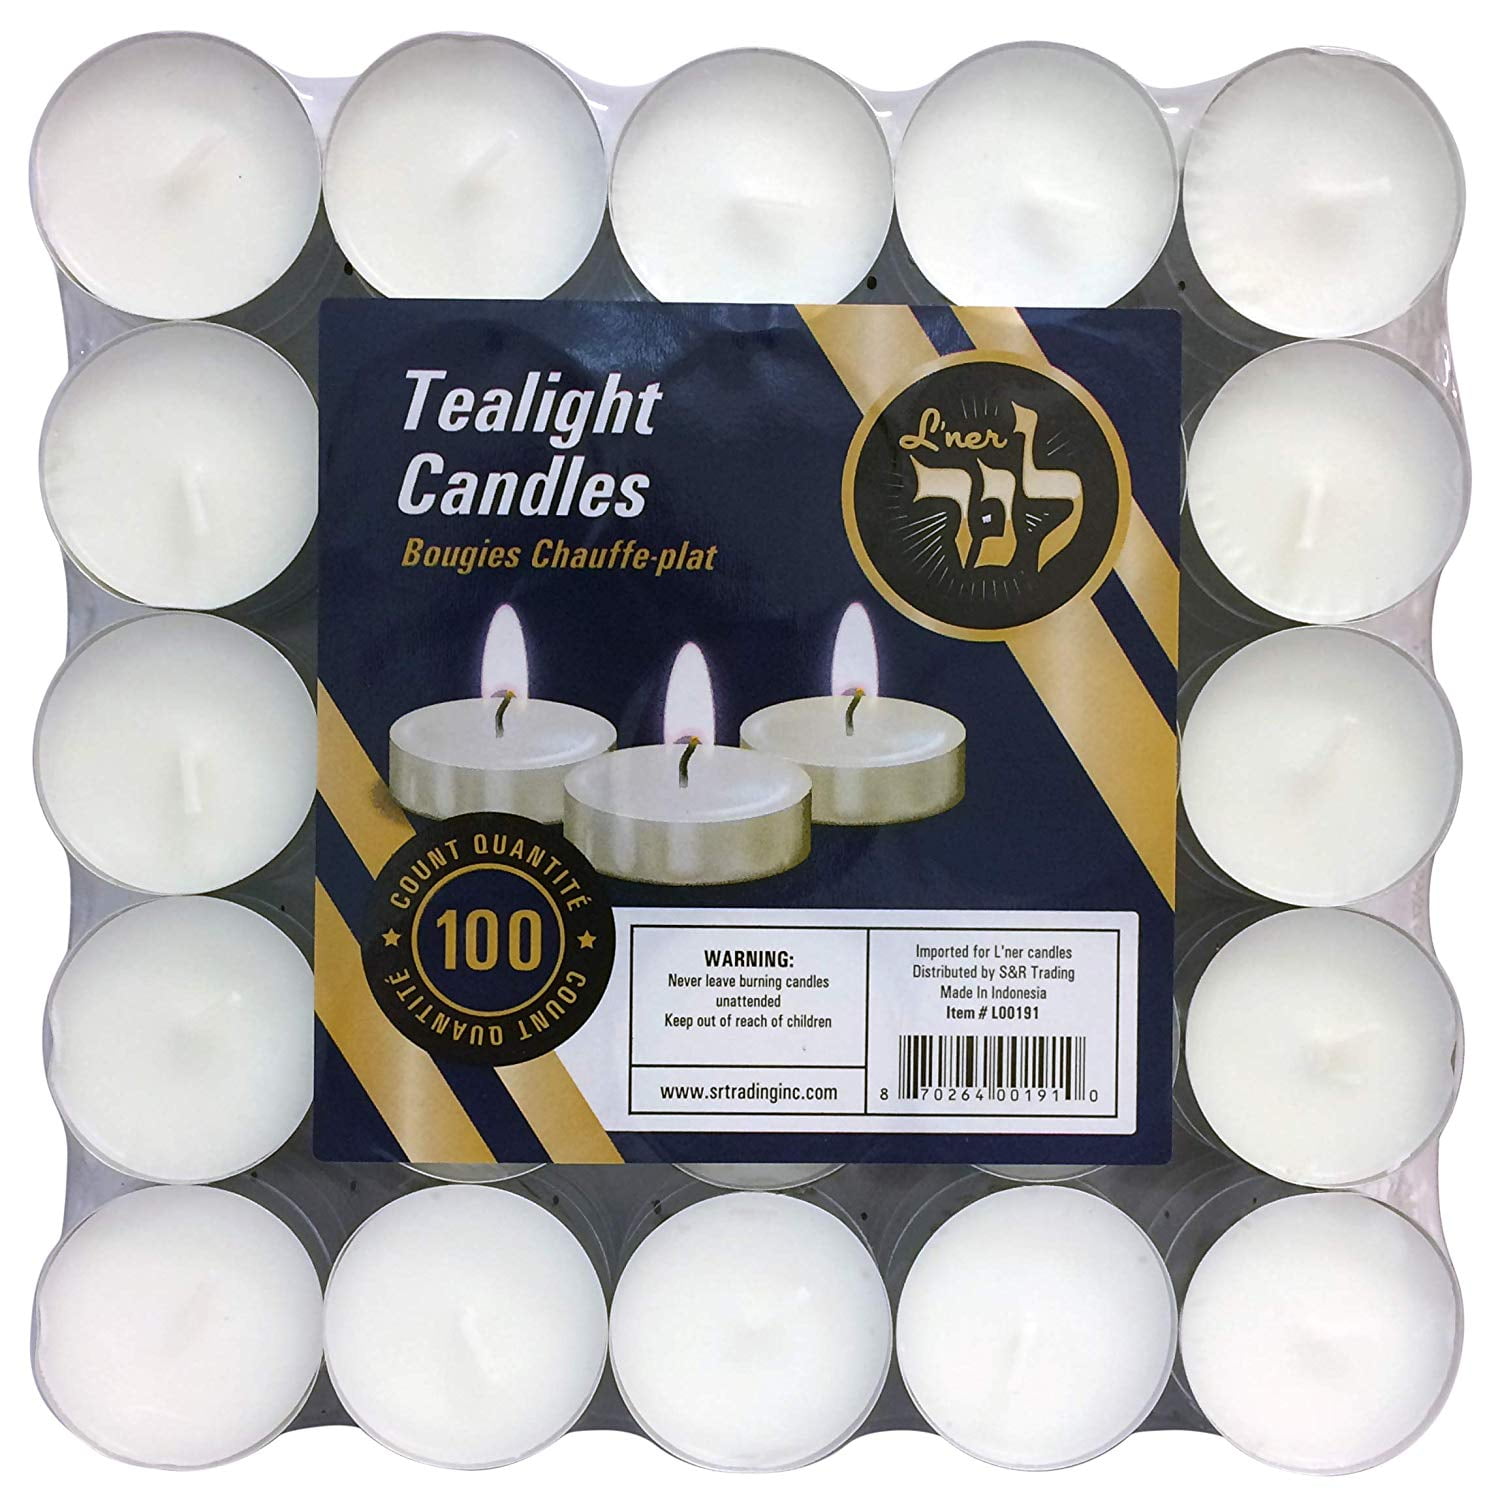 Ohr Tealight Candles - 100 Pack Bulk Tea Lights Candles - White Tealights  Unscented - 4 Hour Burn Time